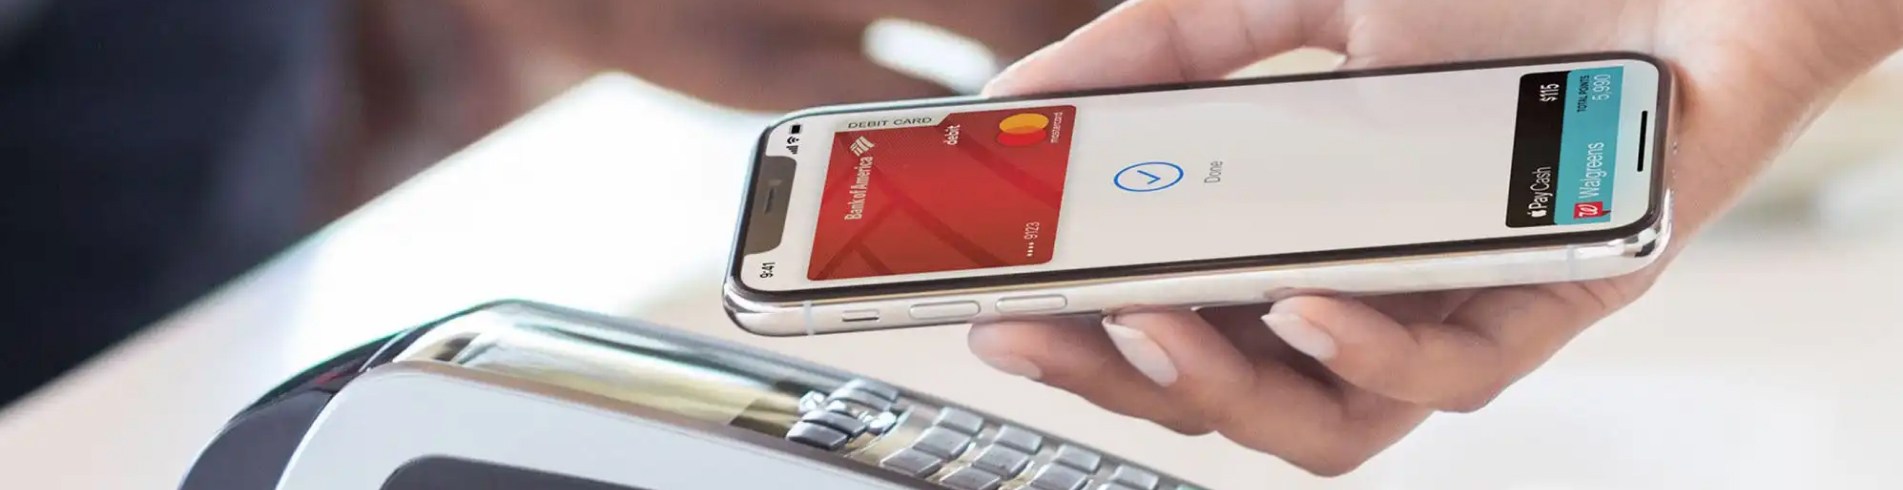 can you get cash back with apple pay